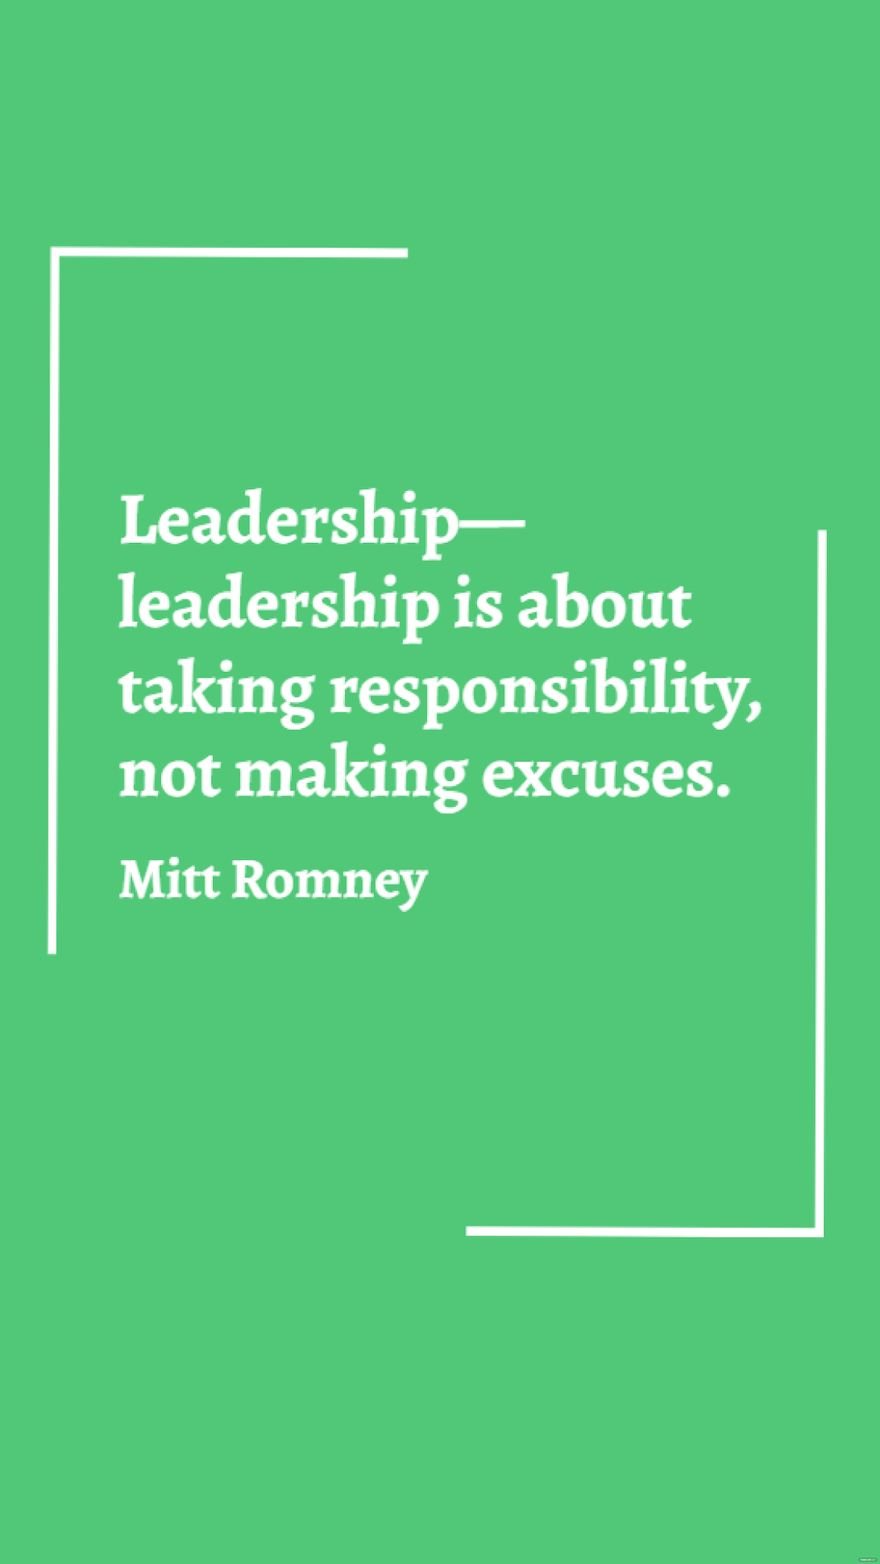 Mitt Romney - Leadership - leadership is about taking responsibility, not making excuses.